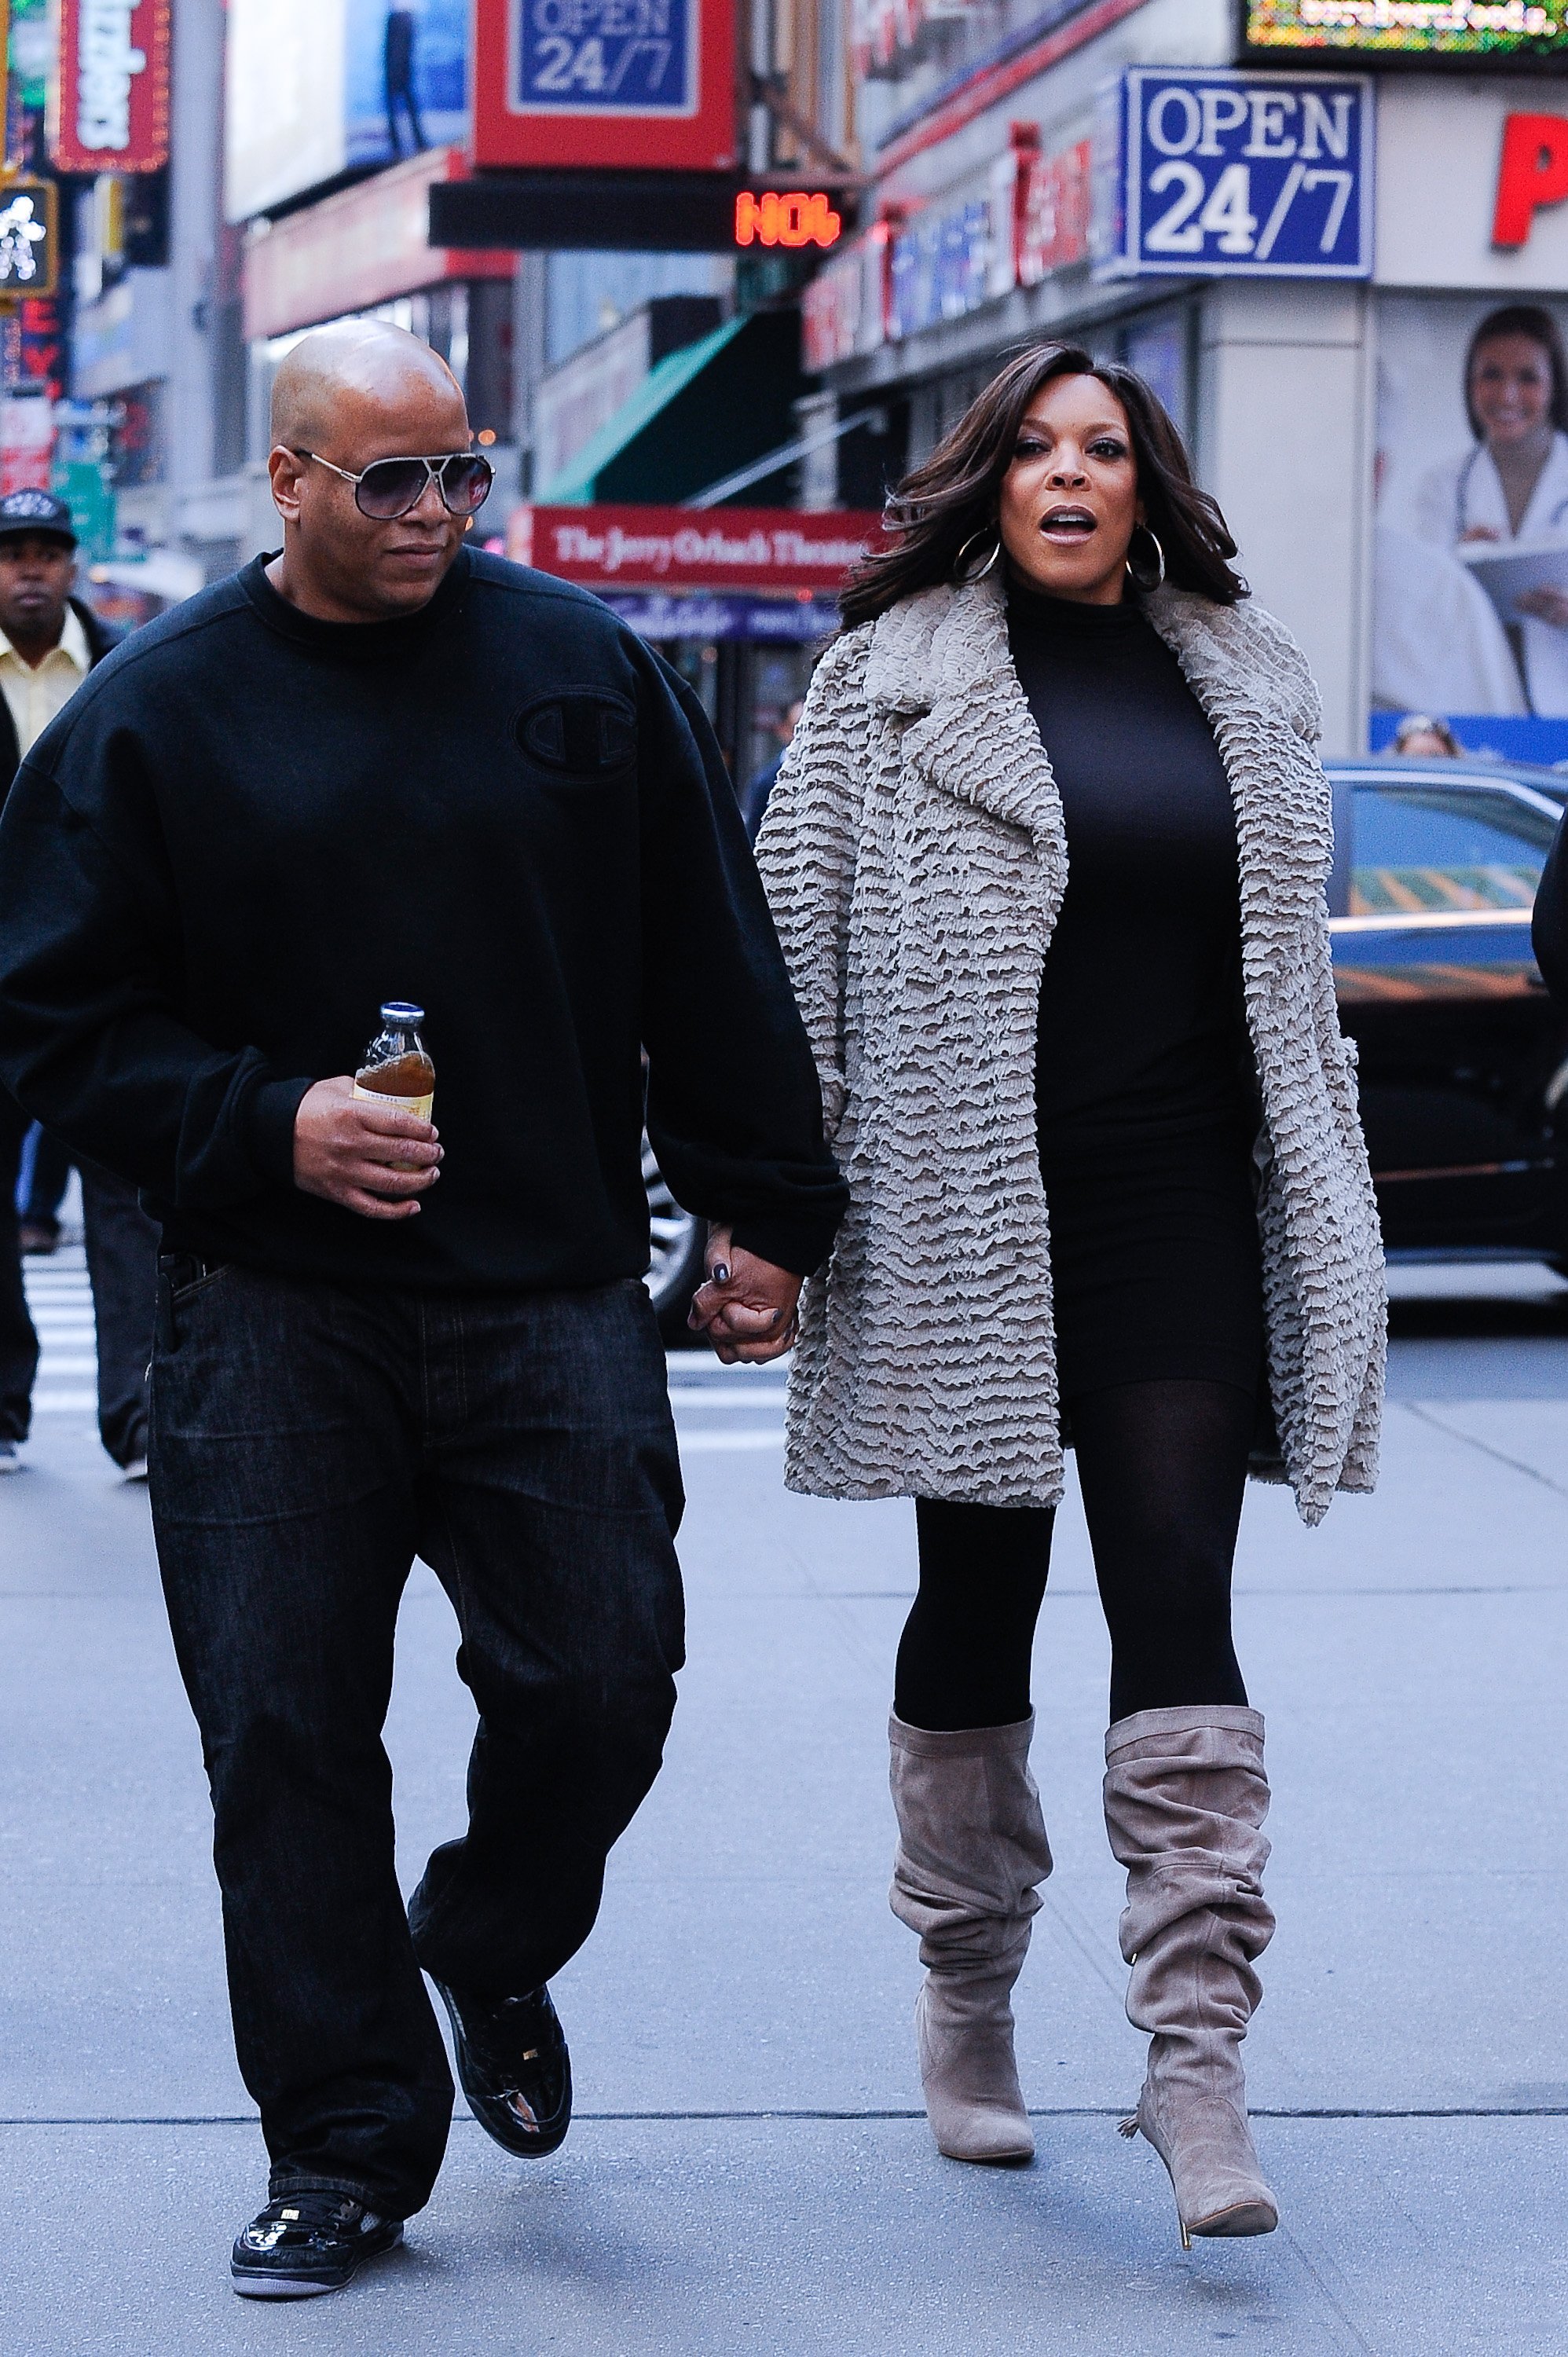 Wendy Williams and Kevin Hunter leave the 'Celebrity Apprentice' film set at Famiglia Restaurant on October 19, 2010. | Photo: GettyImages